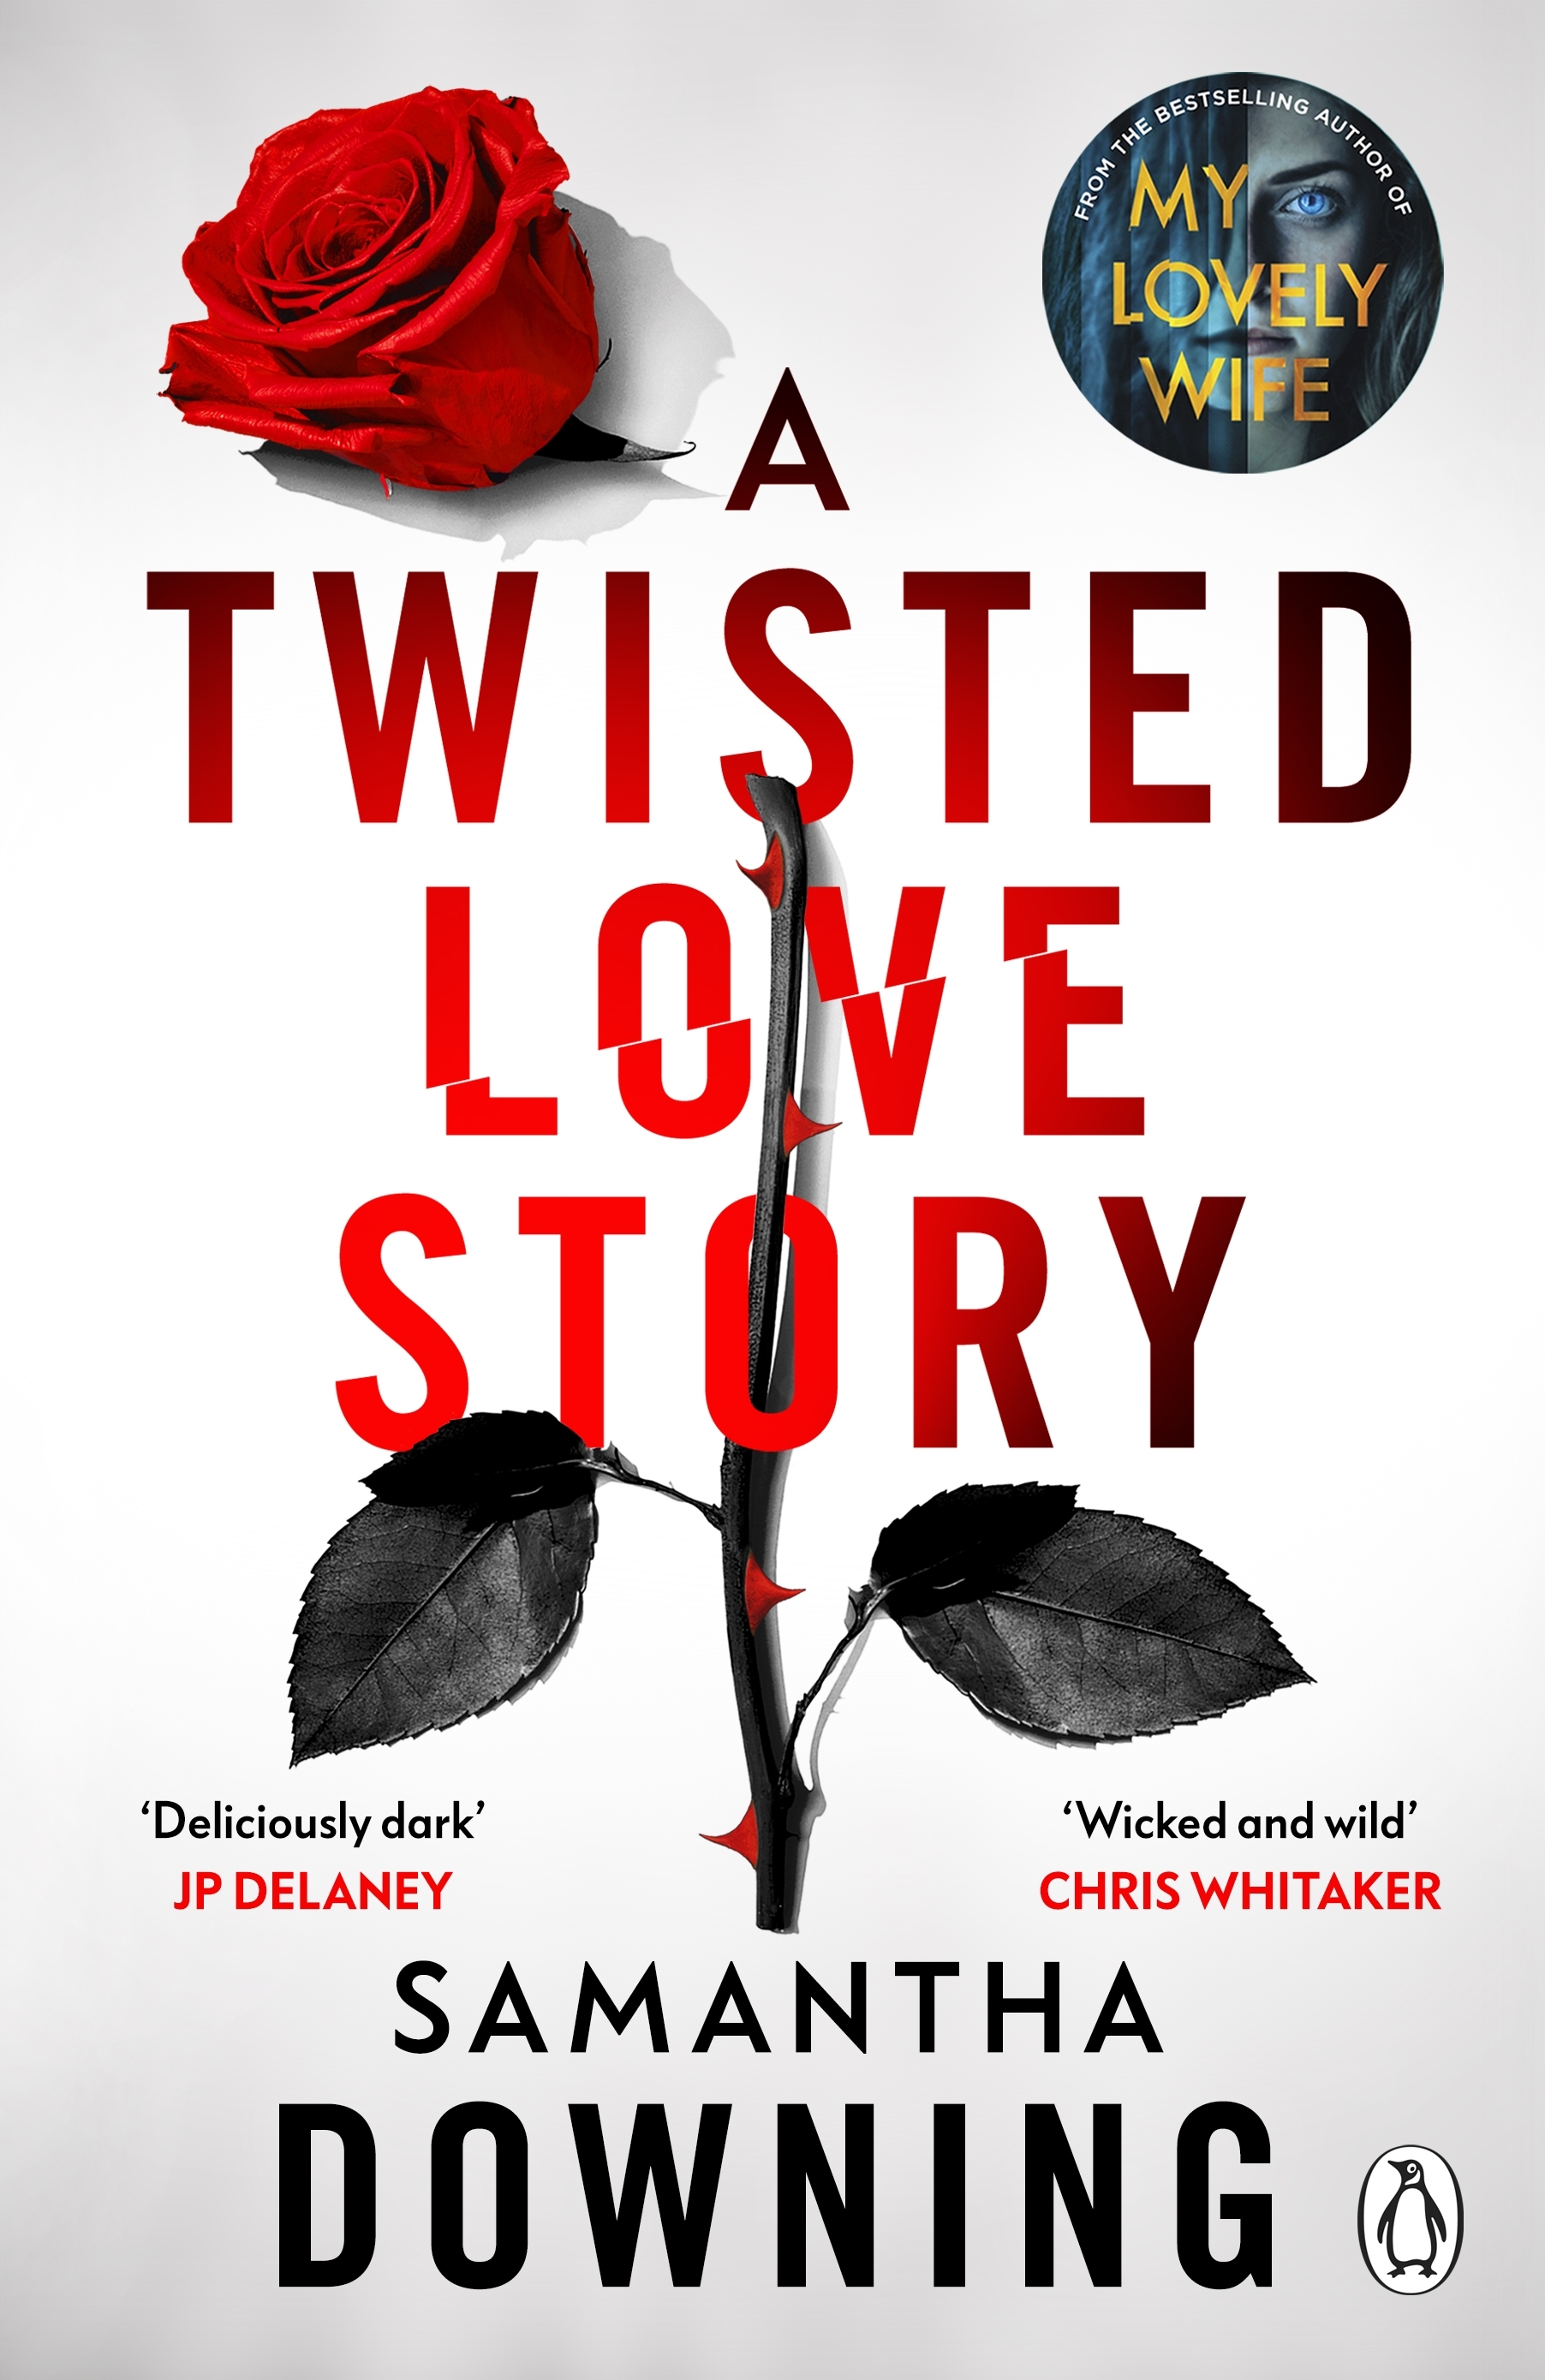 Twisted love